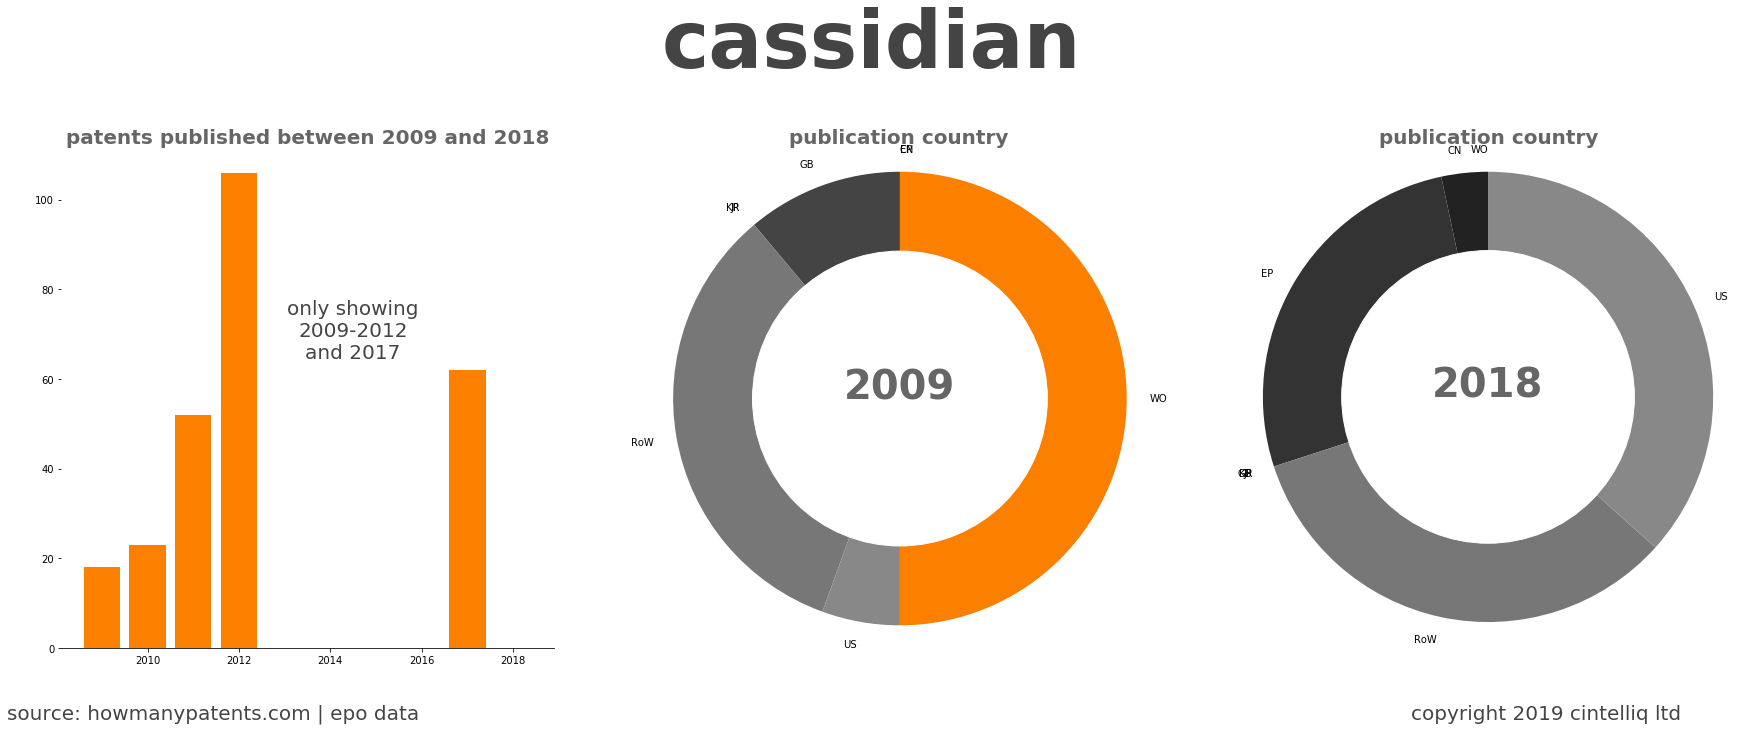 summary of patents for Cassidian